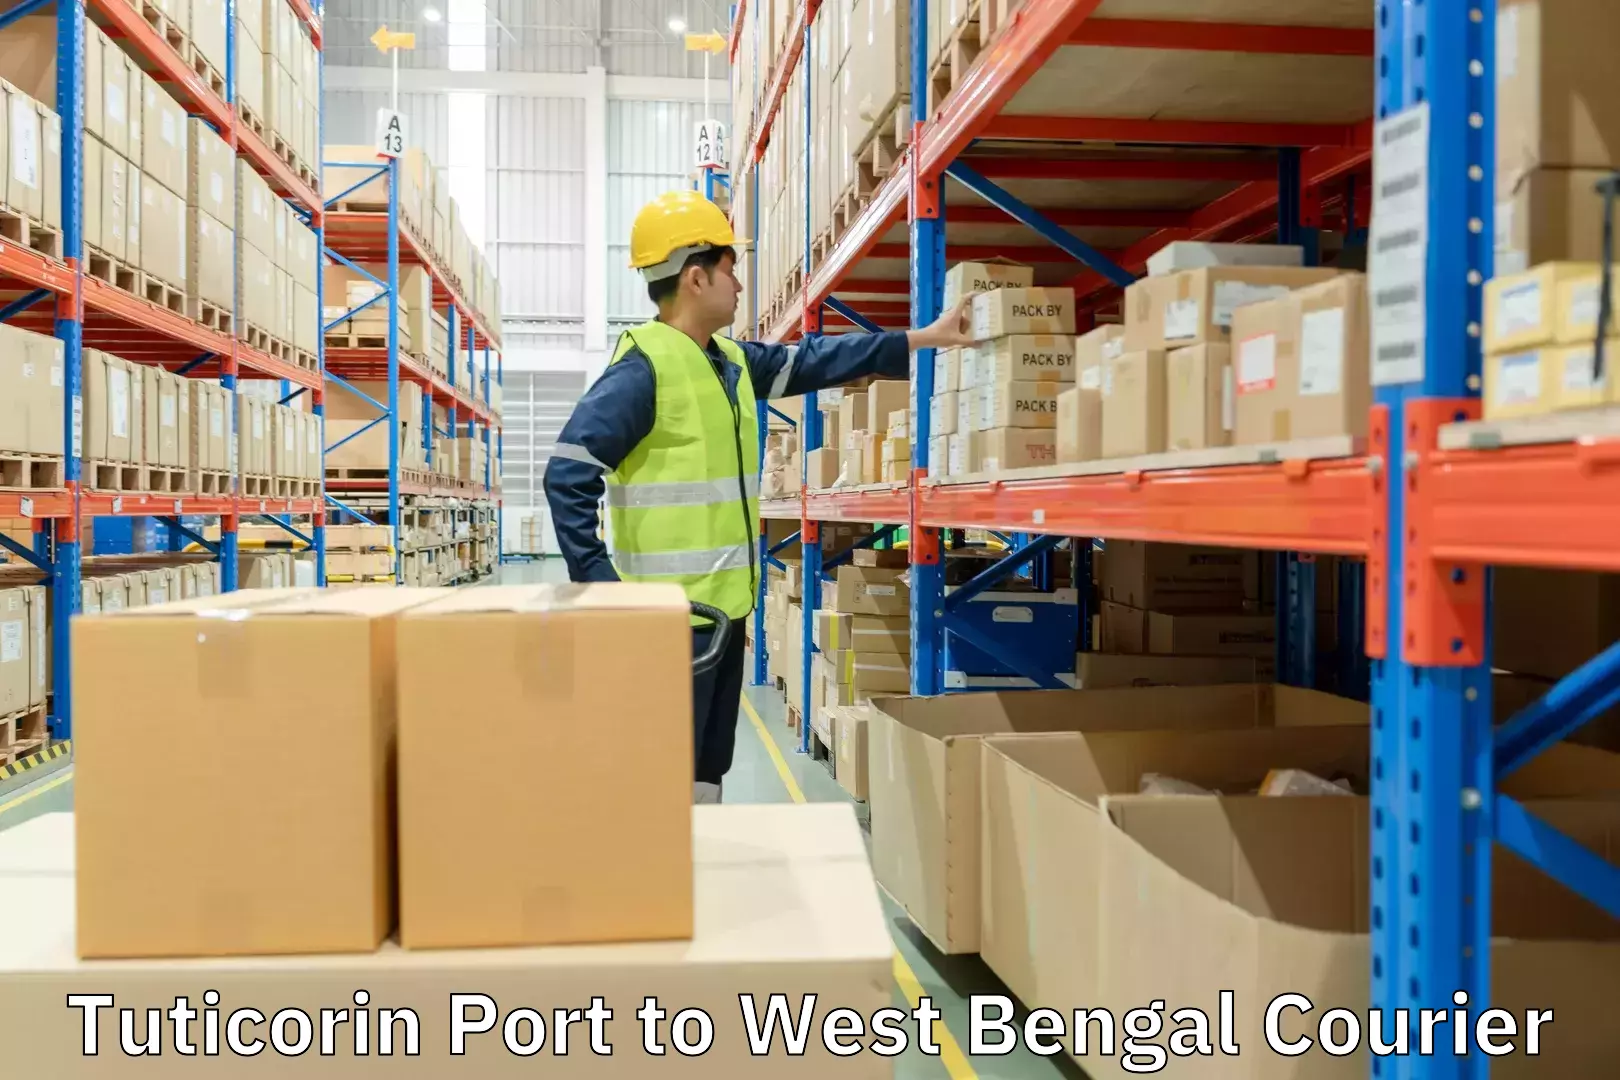 Global freight services Tuticorin Port to West Bengal